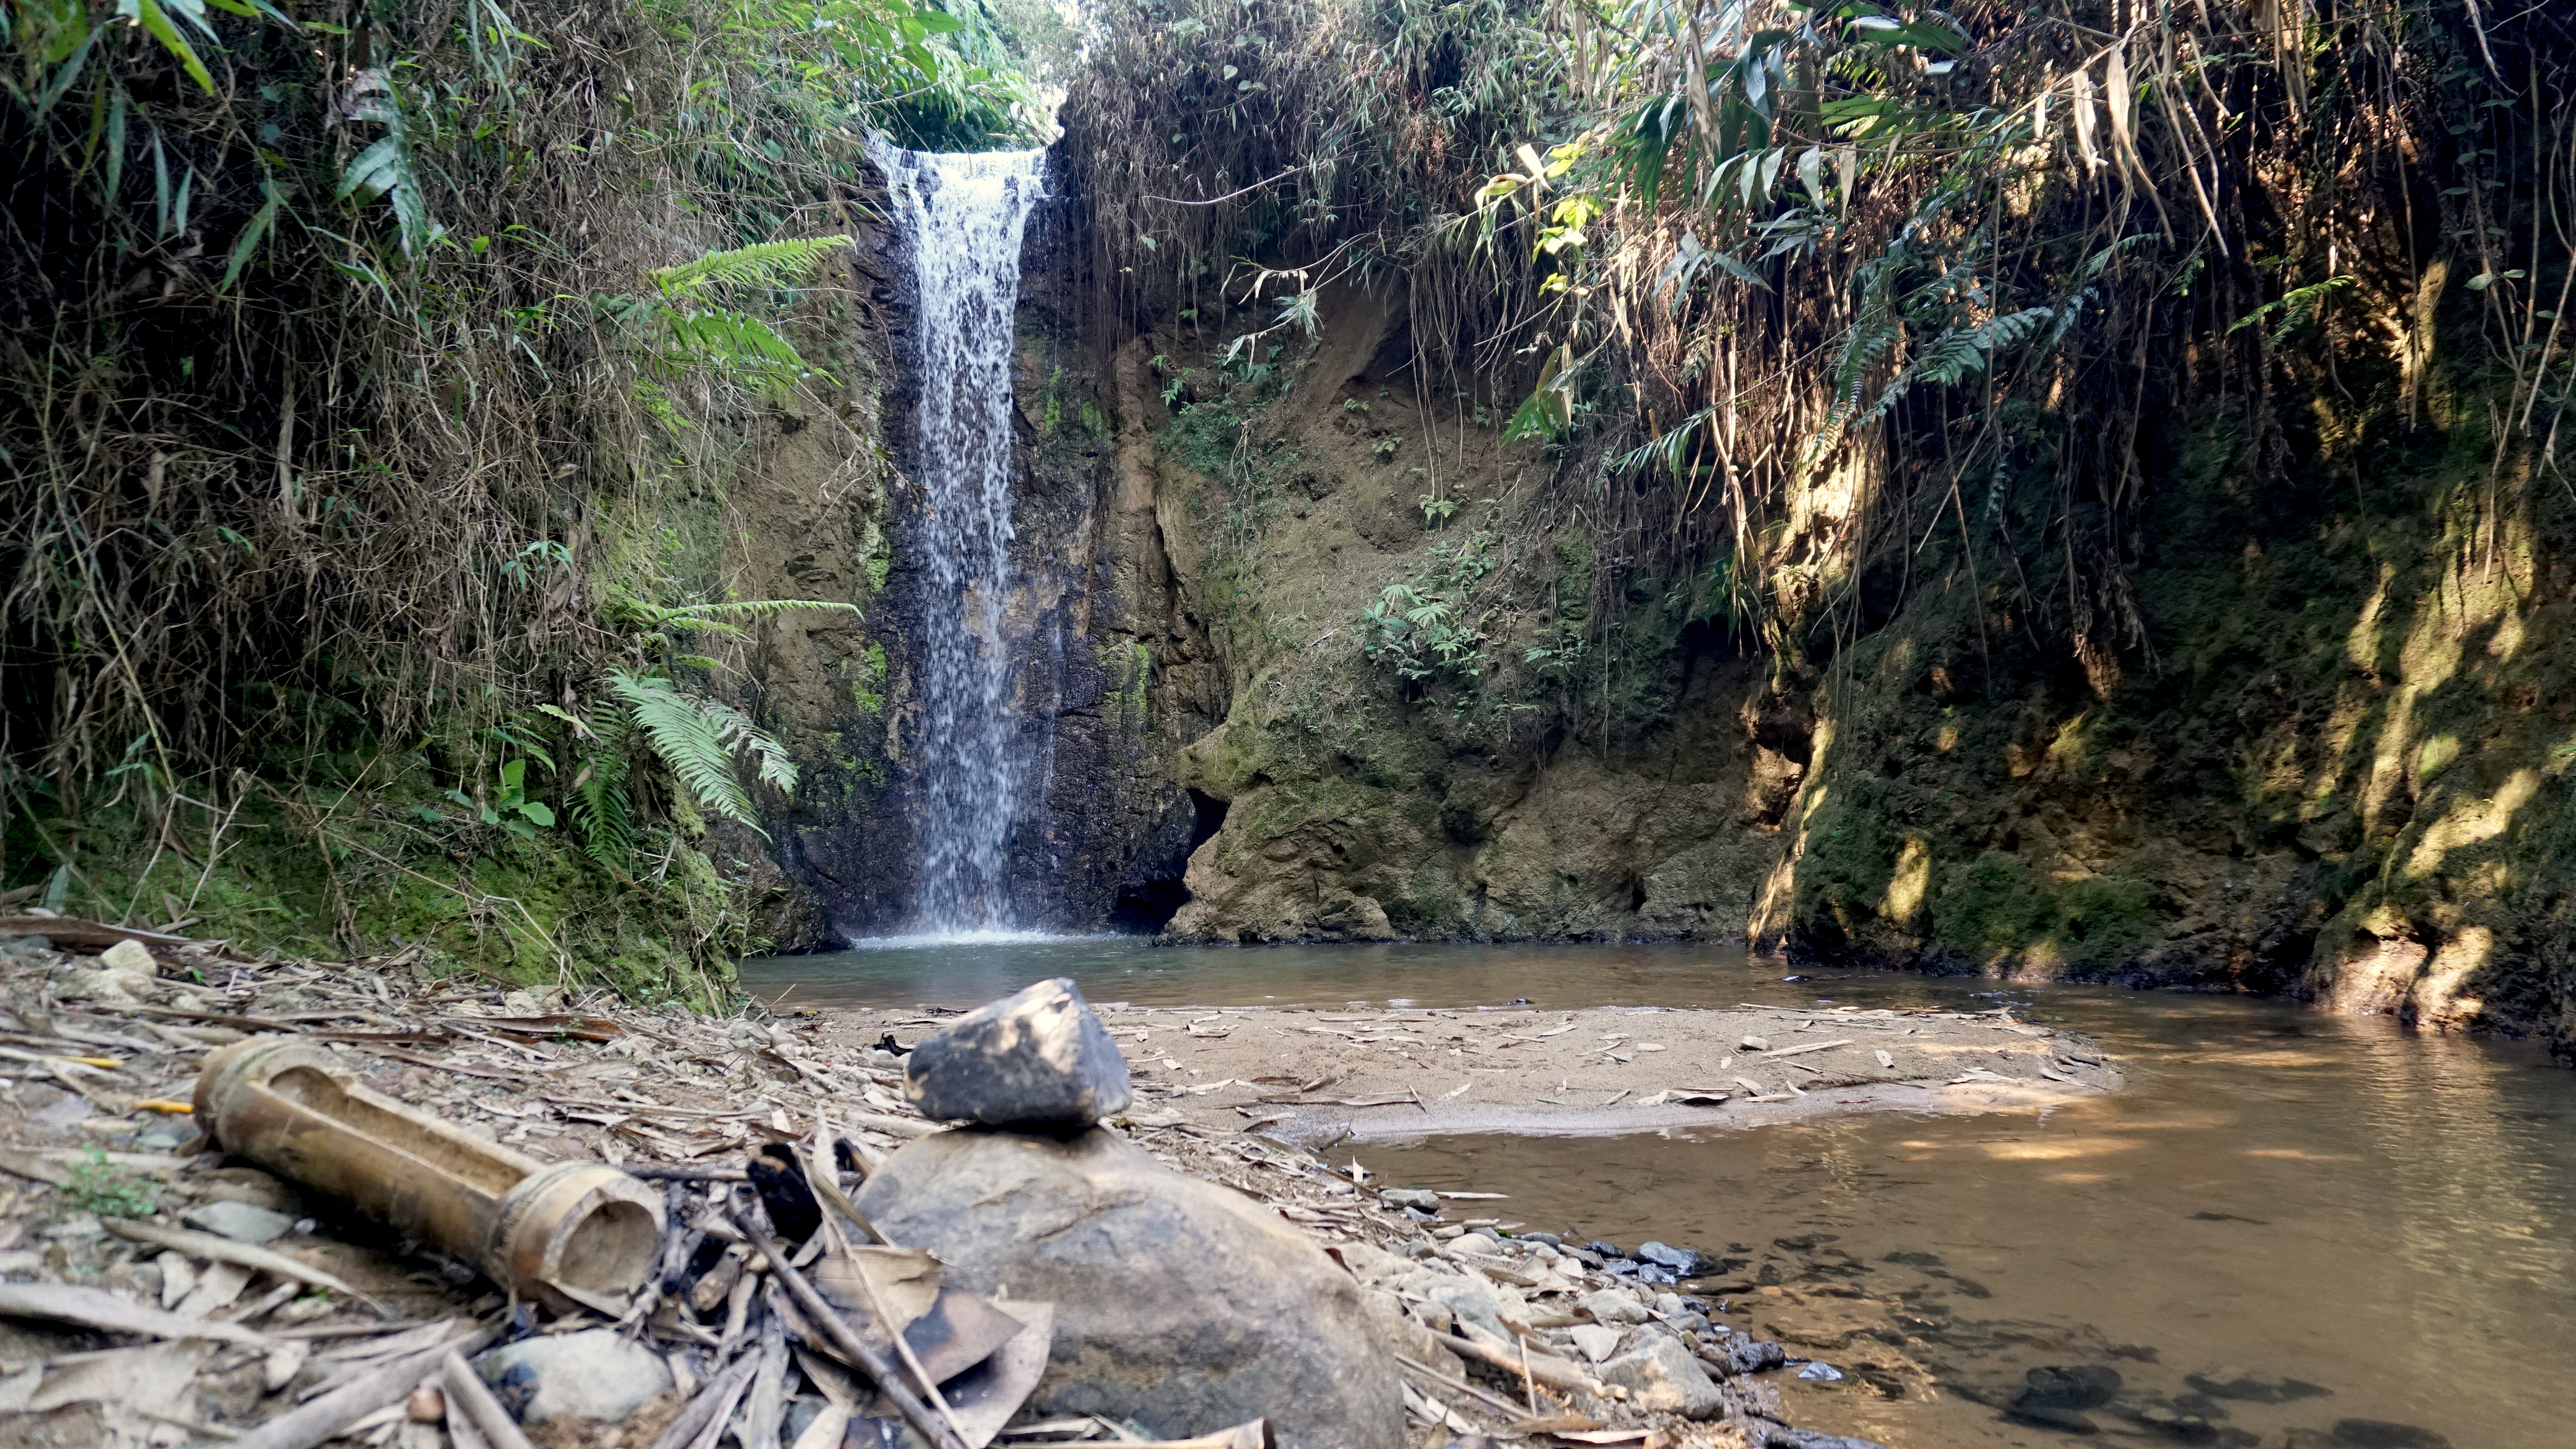 Hikes, which can be customised to travellers’ needs and preferences, bring visitors to spots only locals know about, such as this waterfall. Photo from Krishna Manowang/Local Alike.